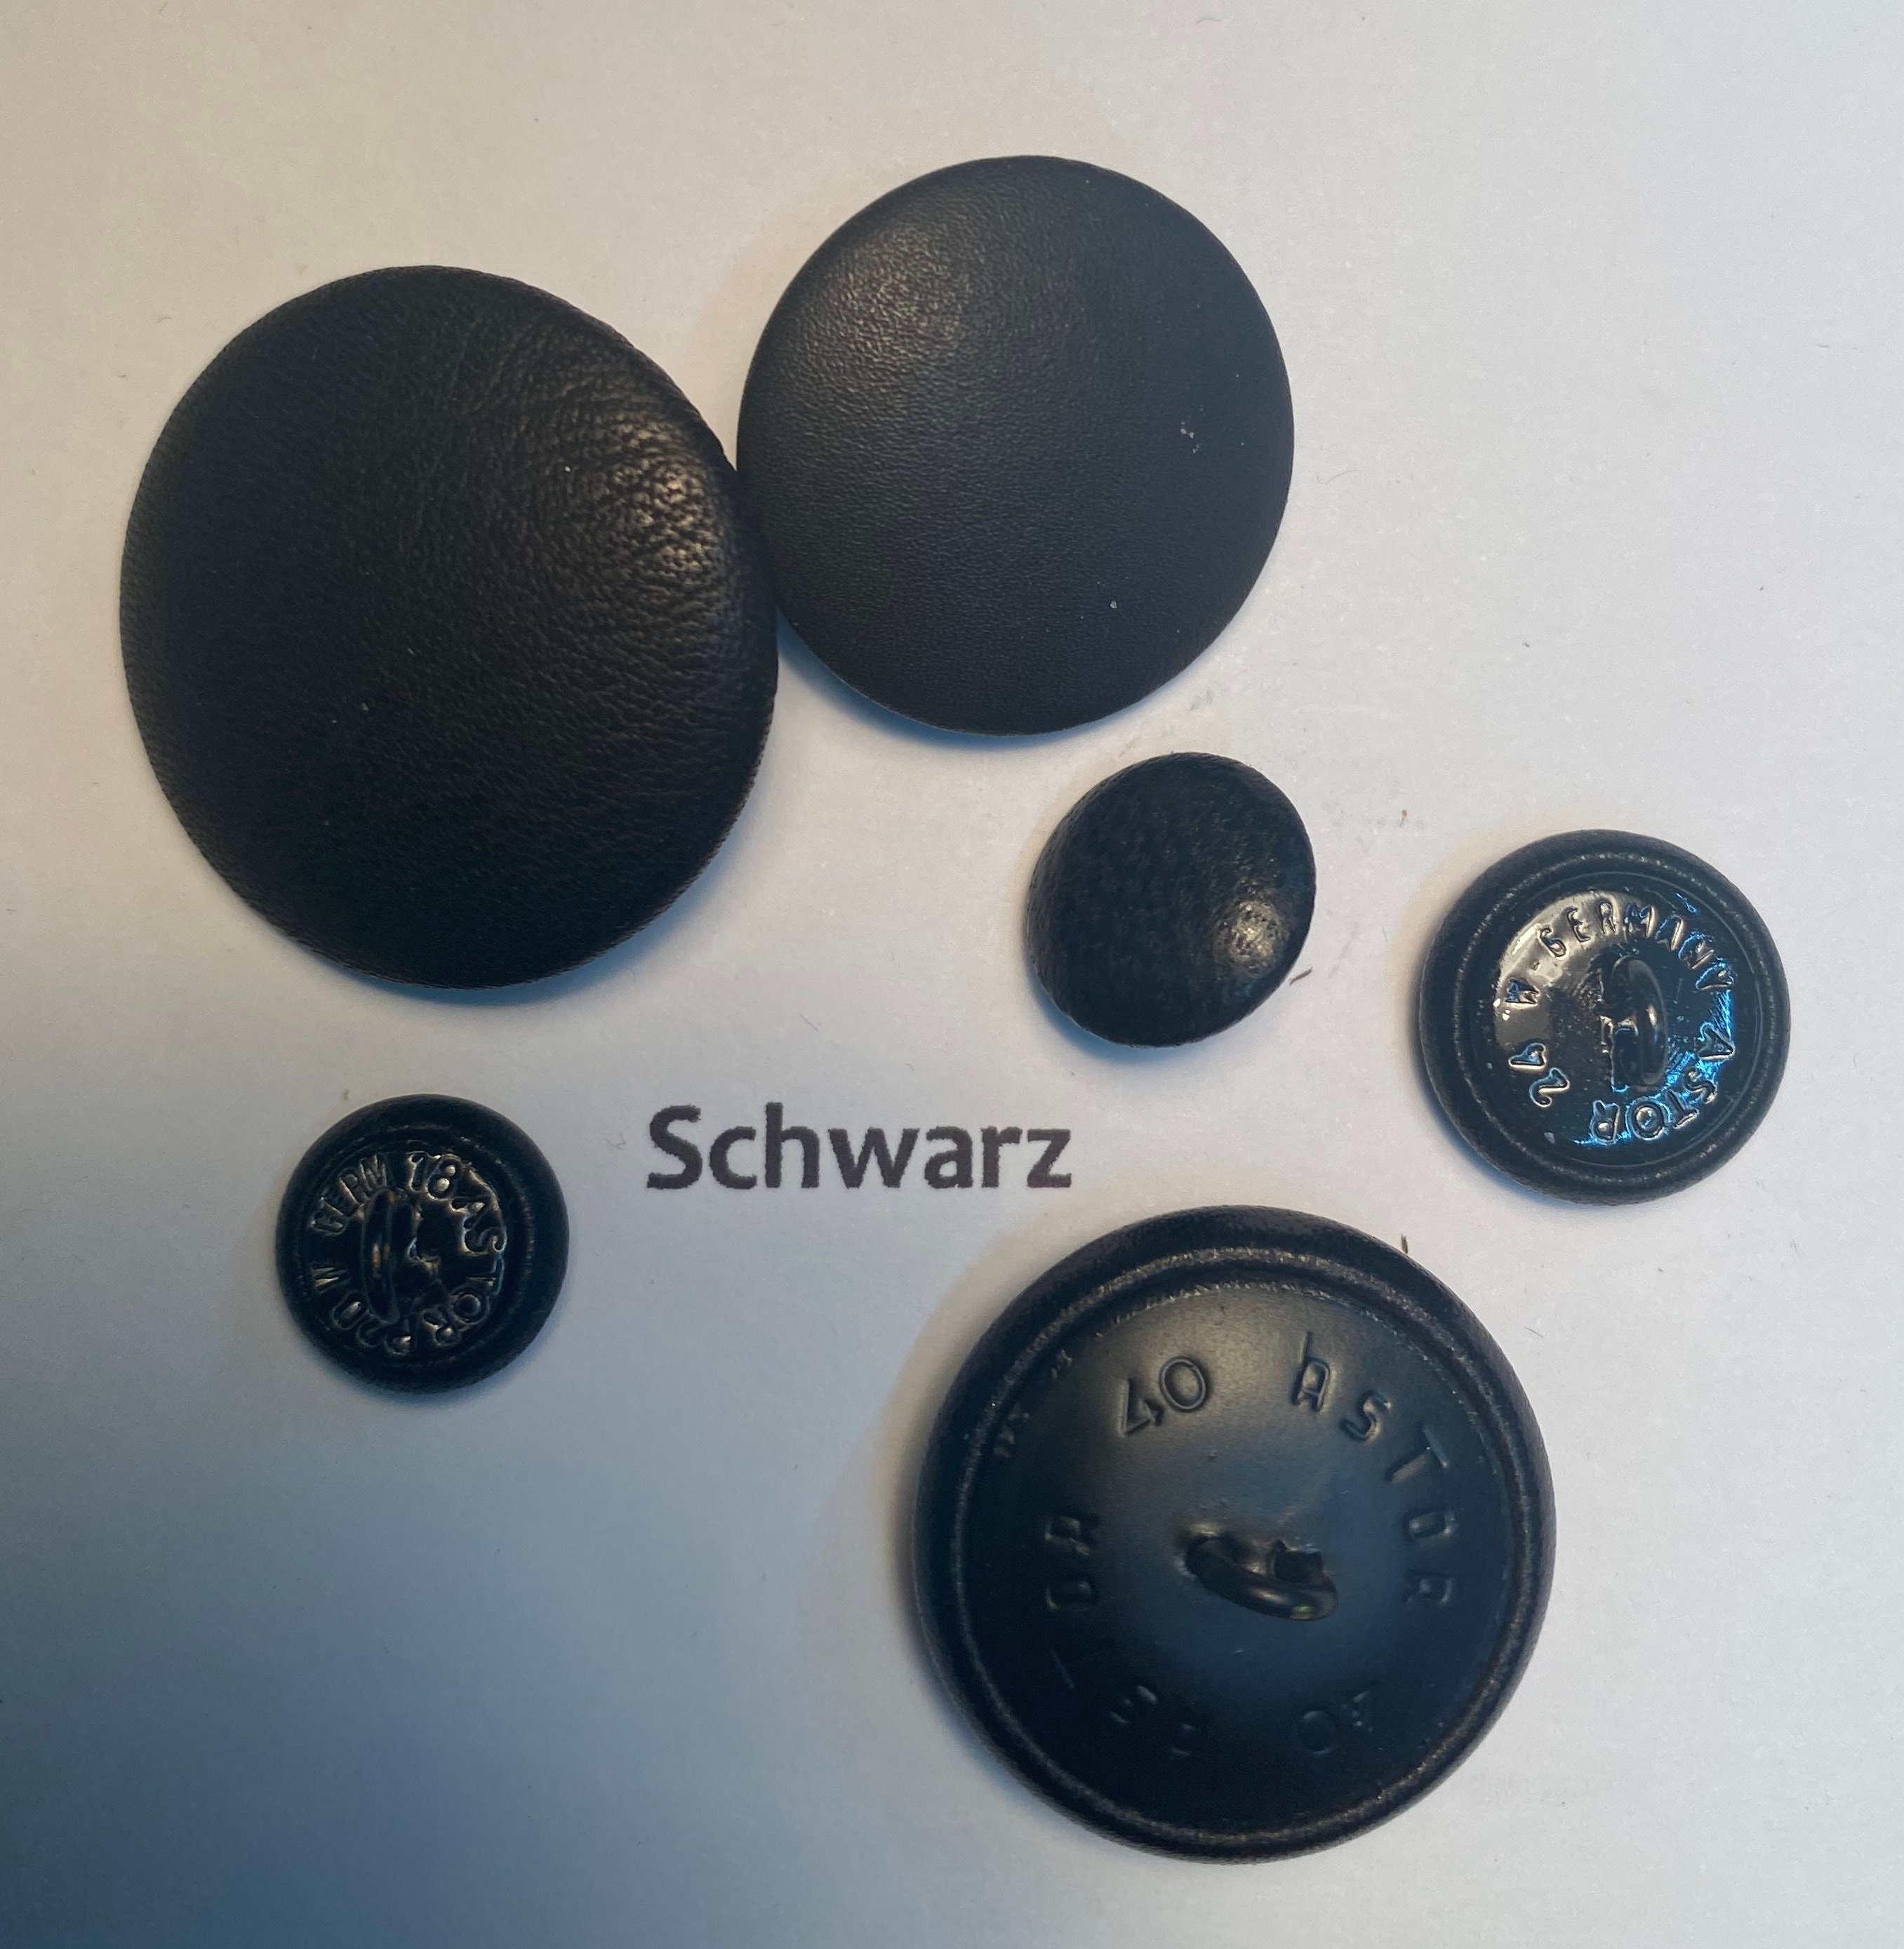 Black Leather Button. Black Leather Covered Button 